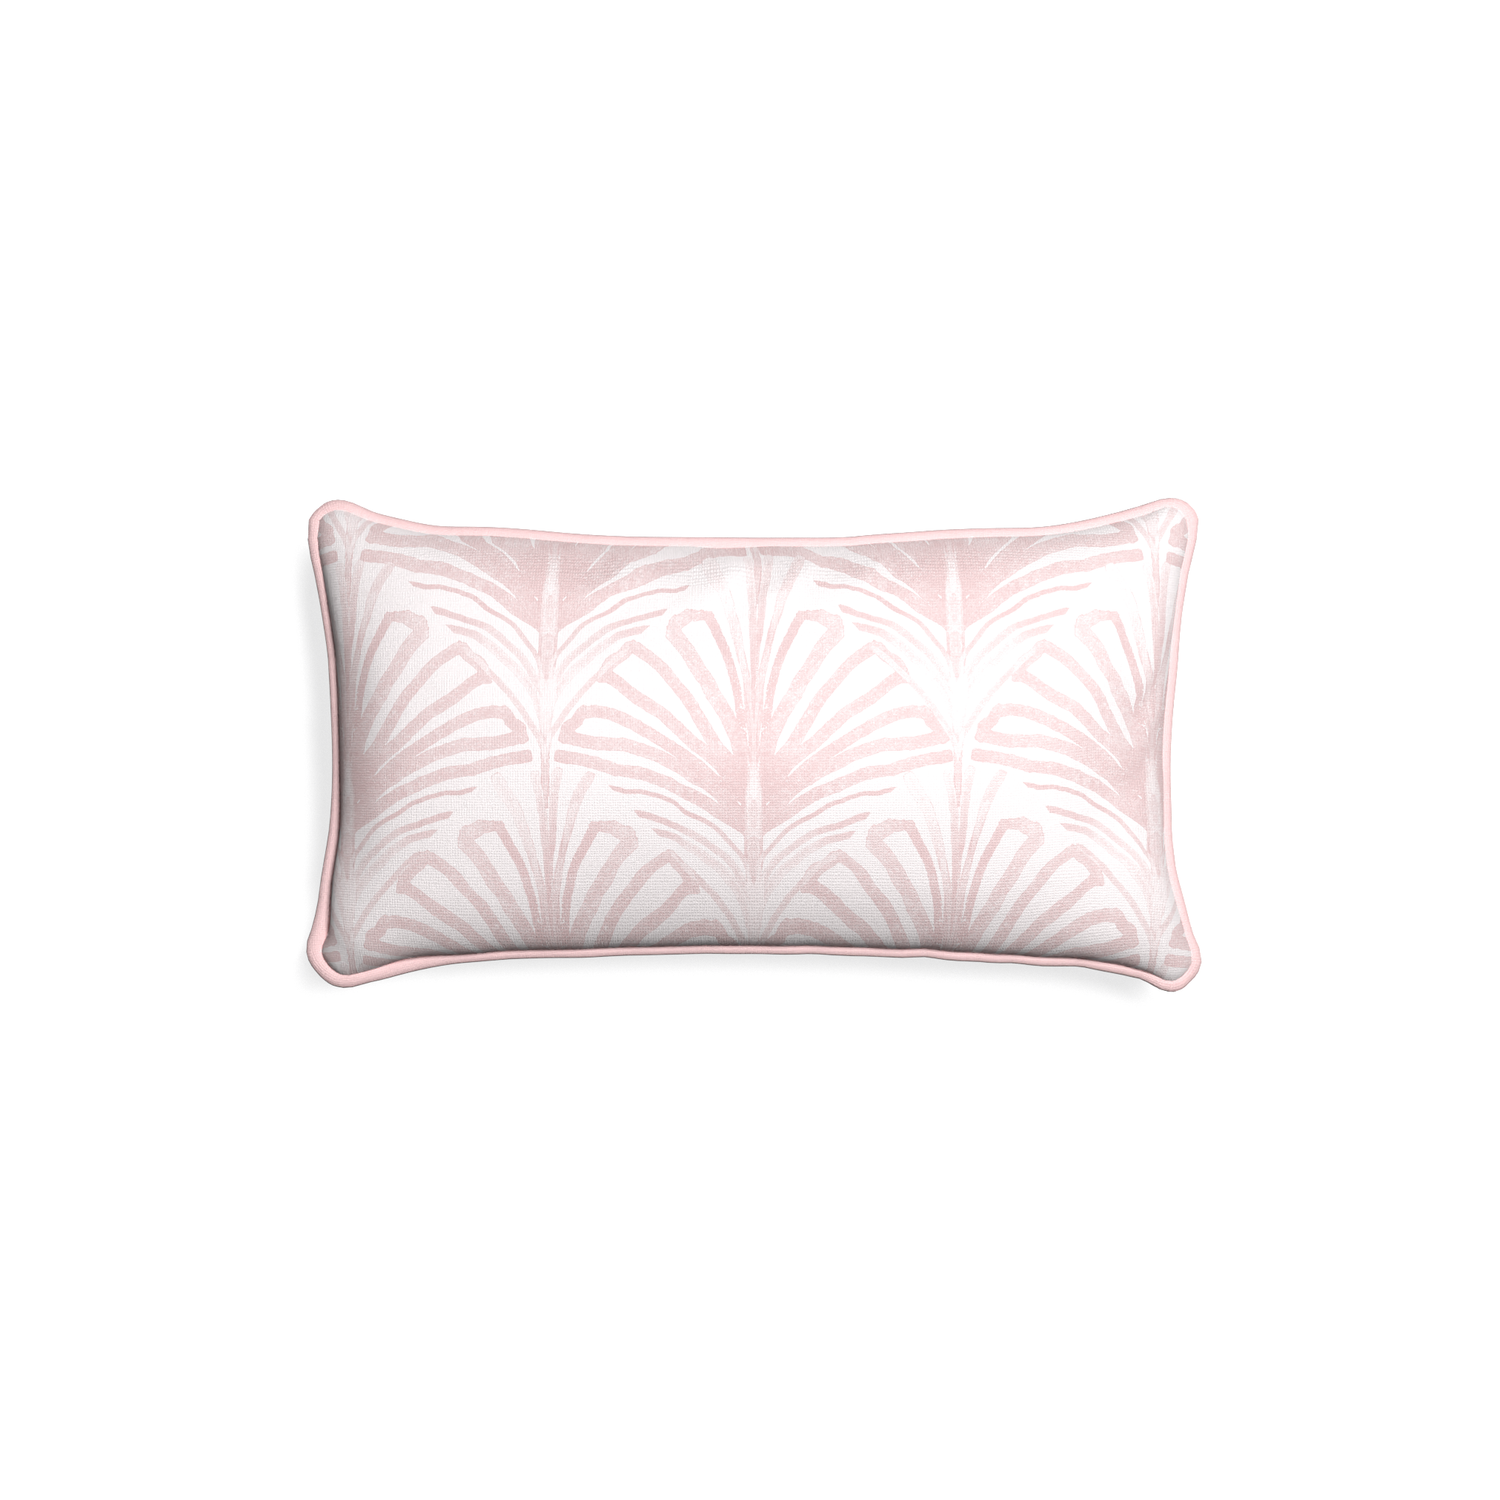 Petite-lumbar suzy rose custom rose pink palmpillow with petal piping on white background